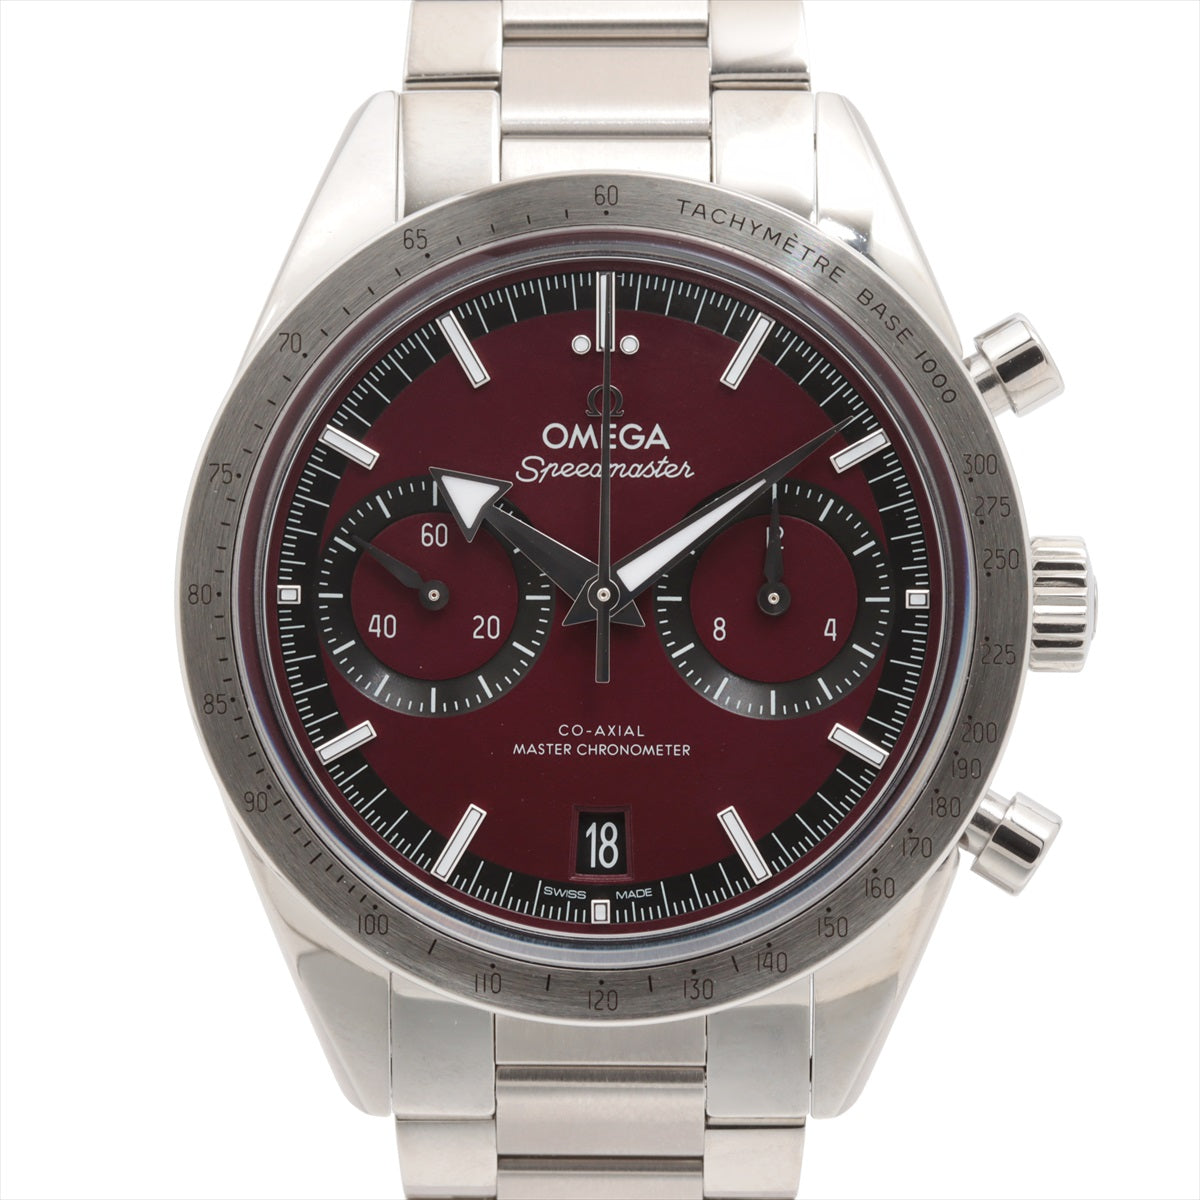 Omega Speedmaster 57 Coaxial Chronograph 332.10.41.51.11.001 SS Stem-winder Red dial